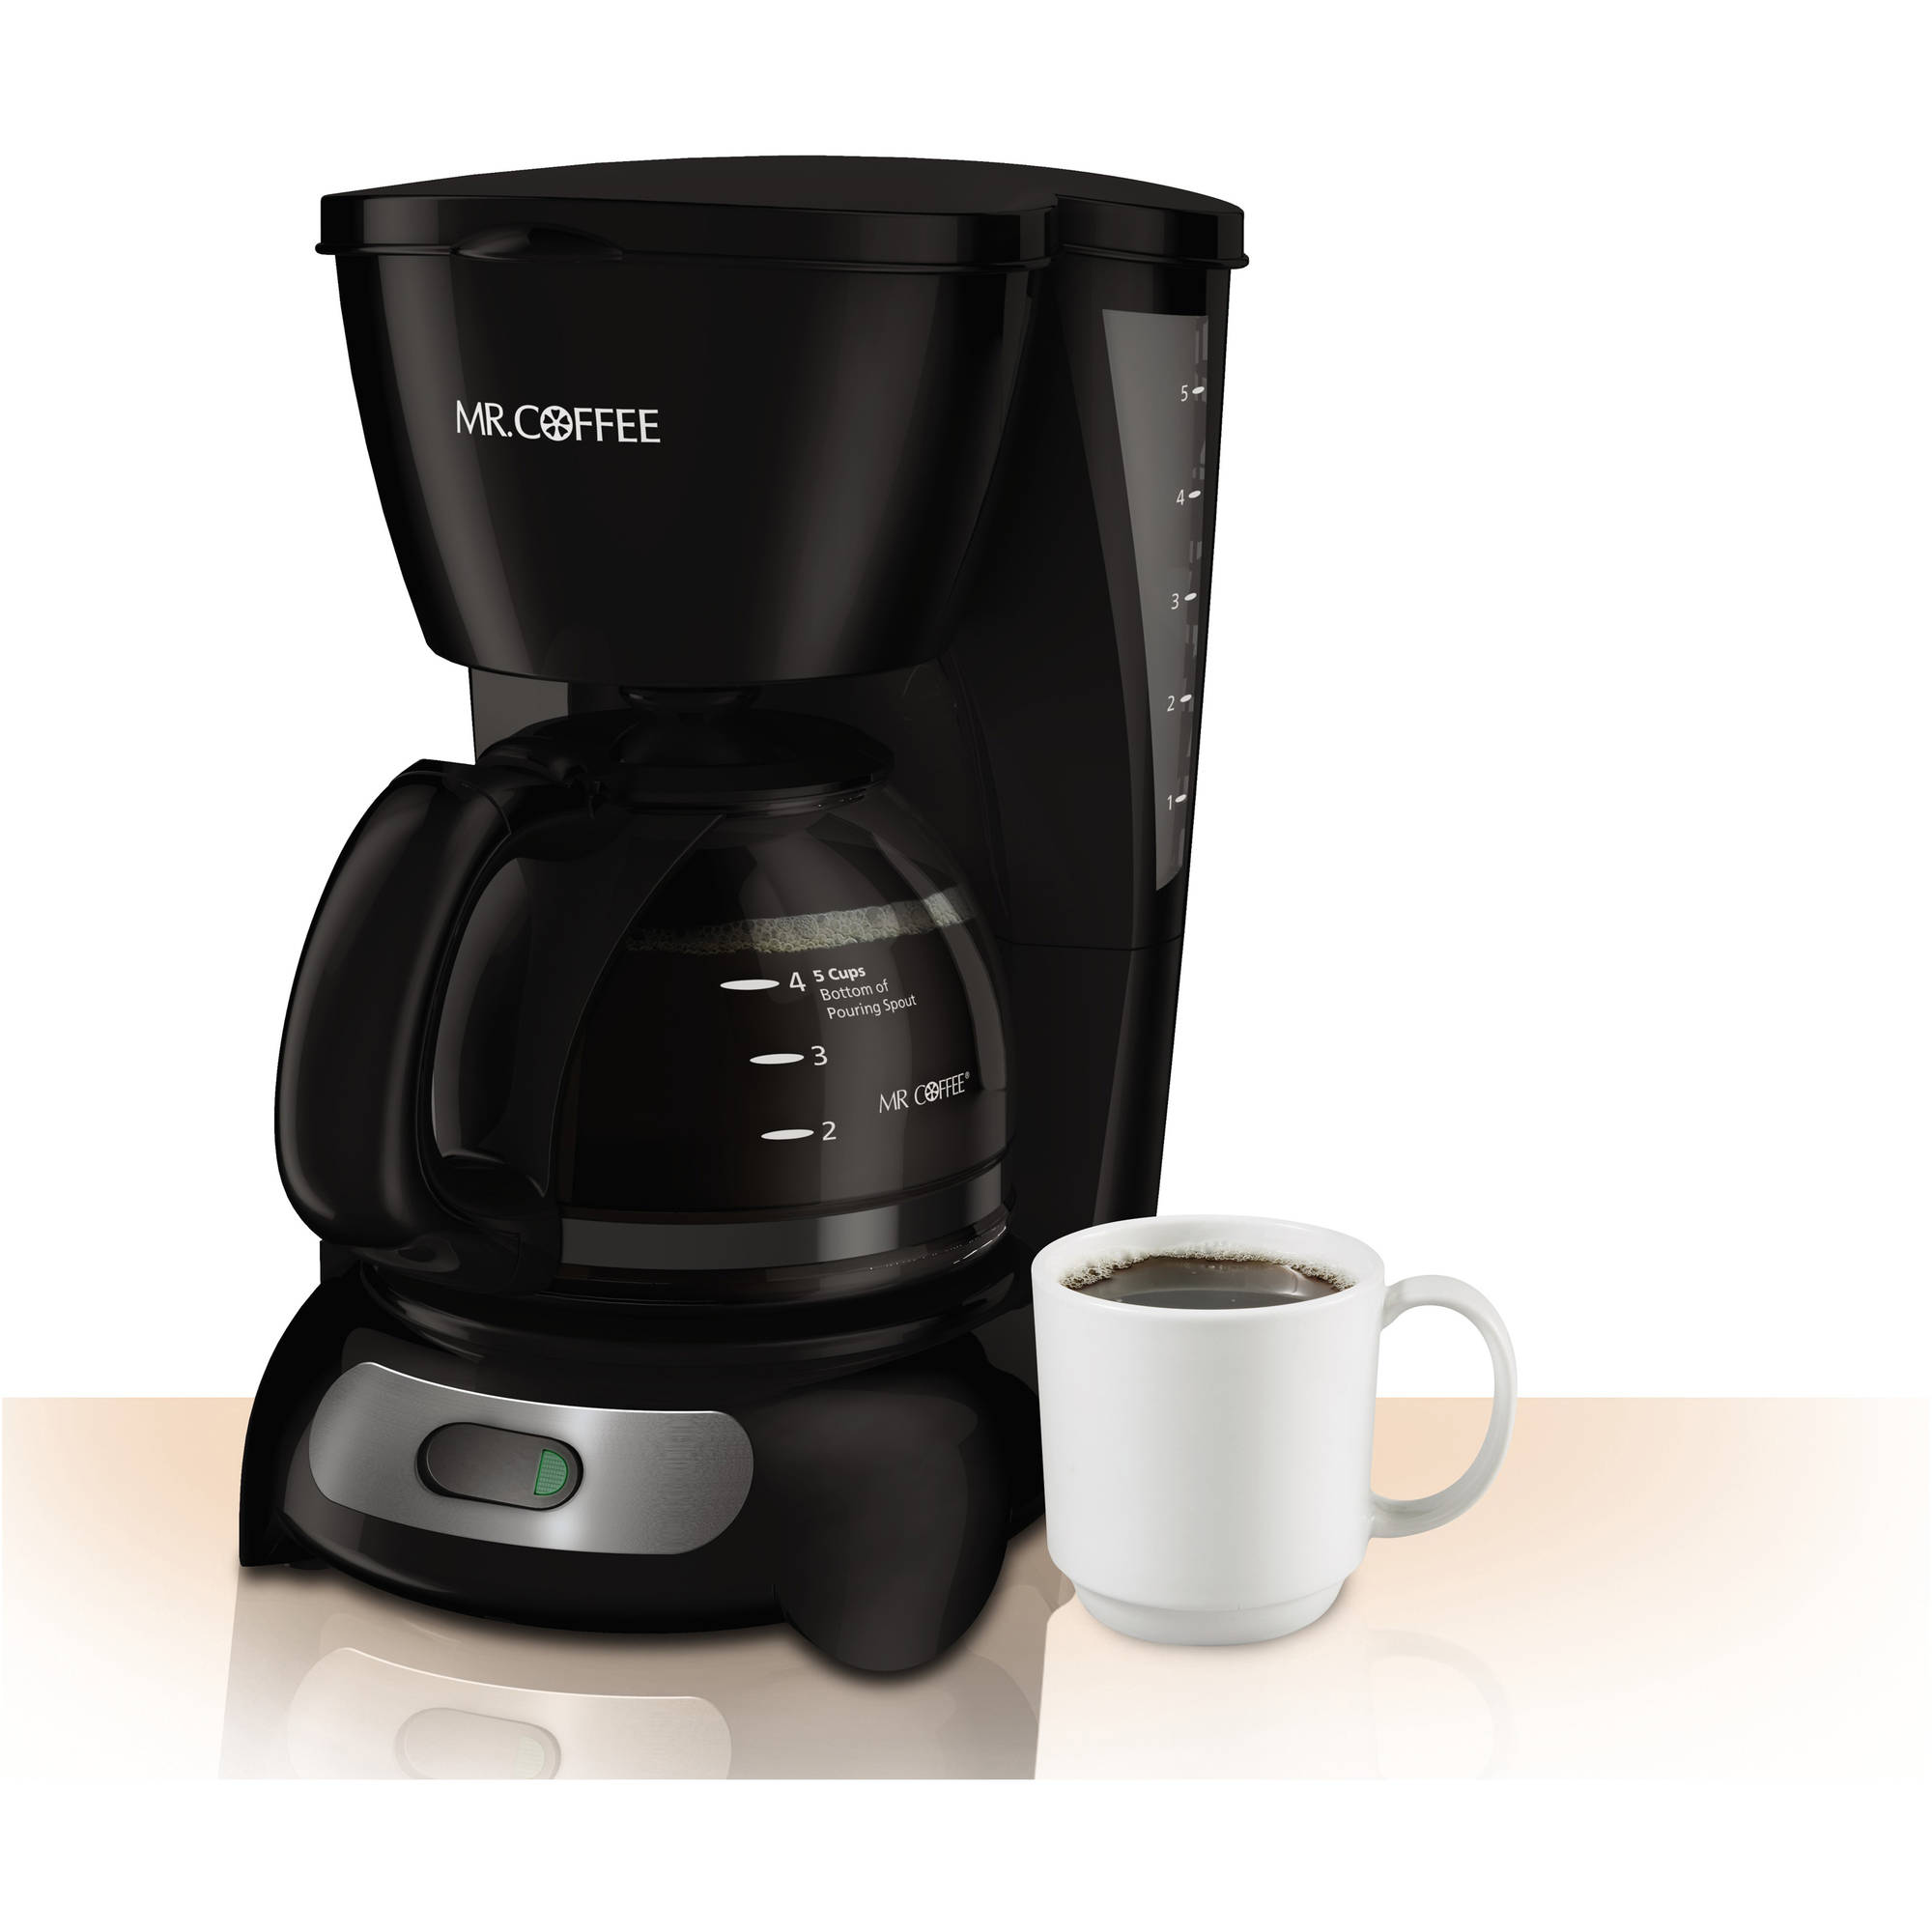 Mr. Coffee 5-cup coffeemaker for $6